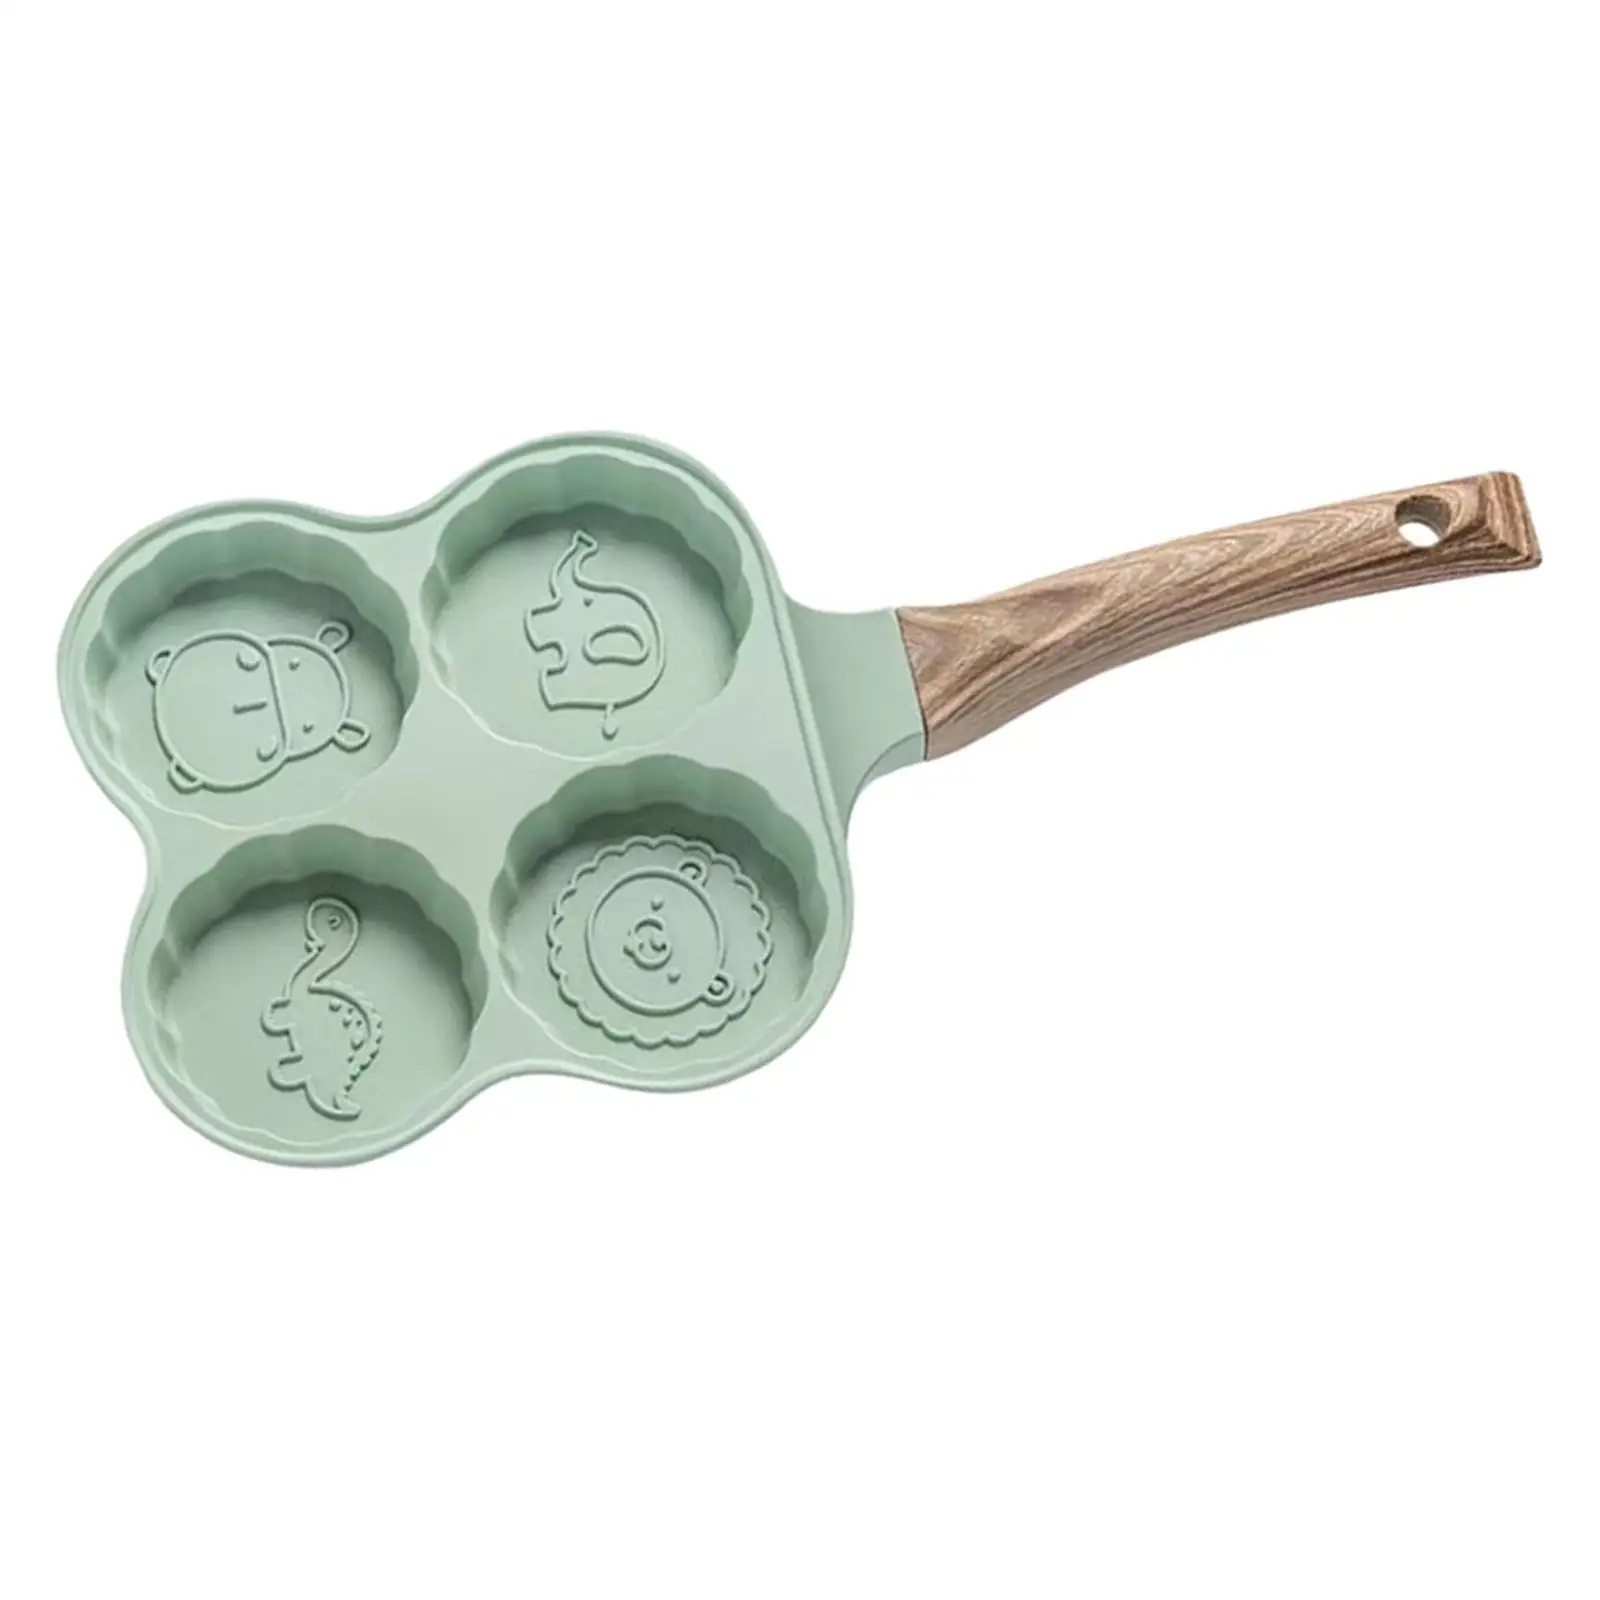 Egg Frying Pan Pancake Maker Wooden Handle Cookware Small Frying Pan Egg Ham Pans for Breakfast Induction Cooker Gas